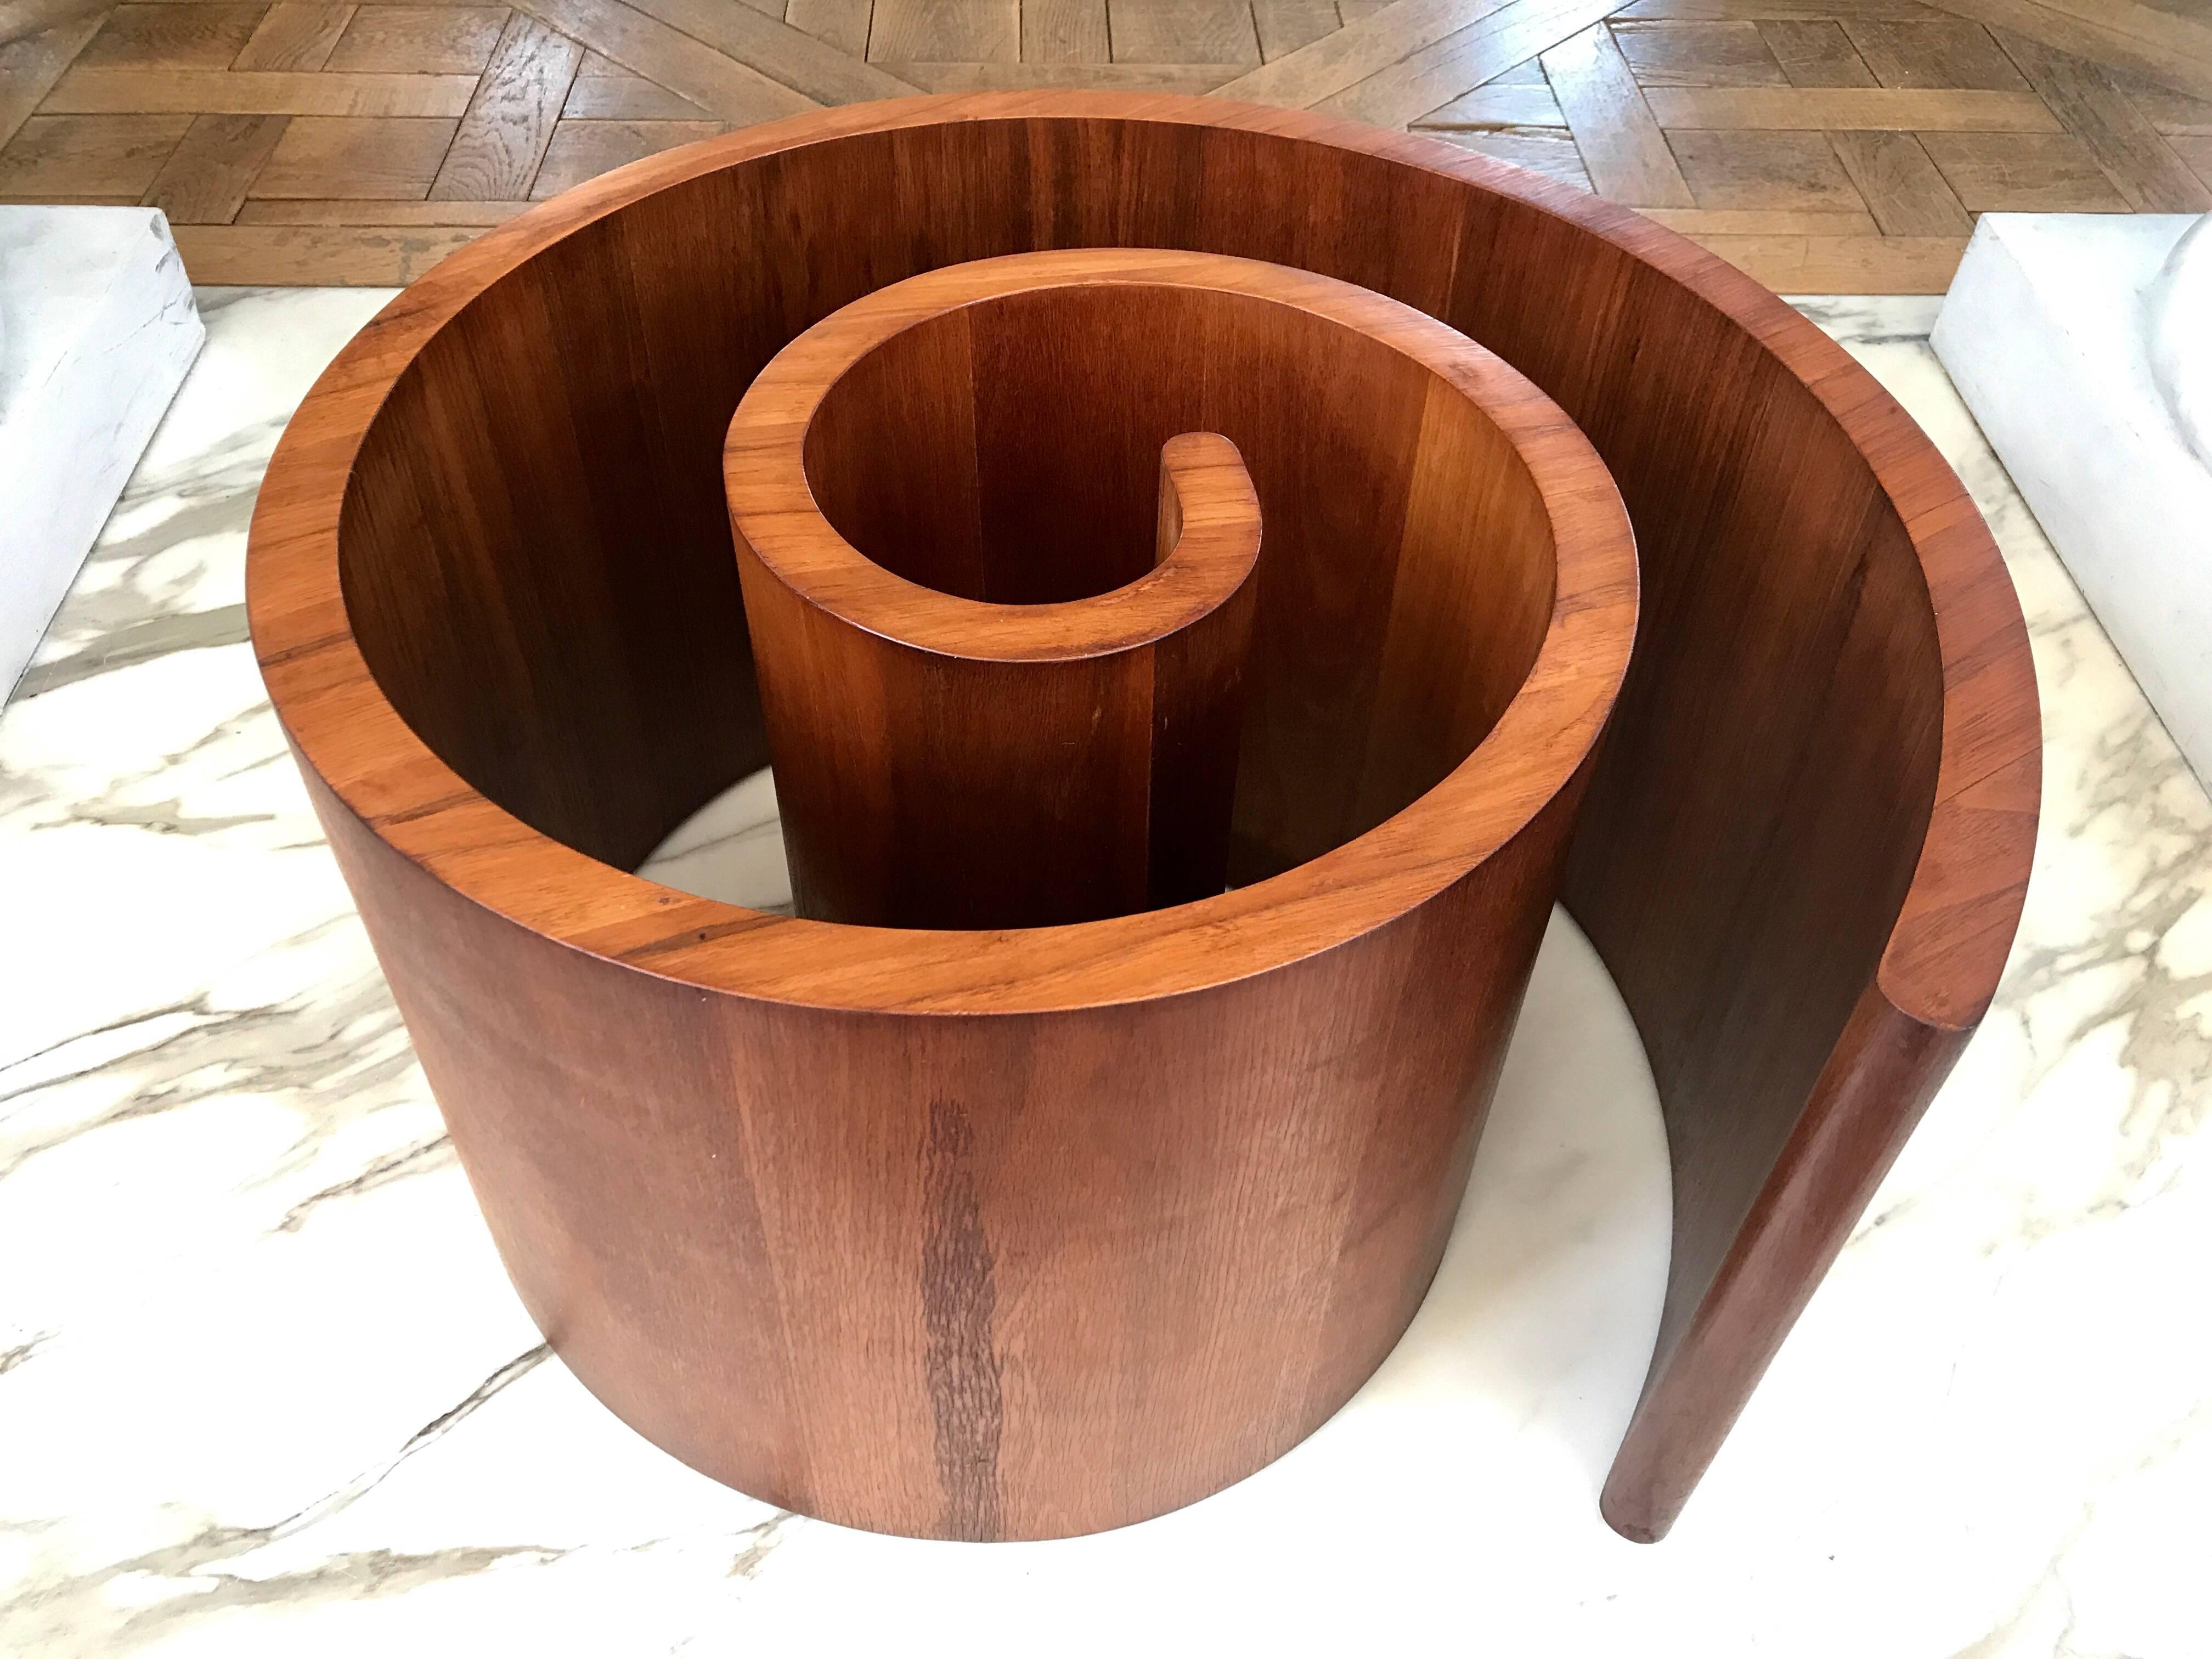 A very rare Vladimir Kagan Snail coffee table made of light mahogany with a linseed oil finish, circa 1960. (14